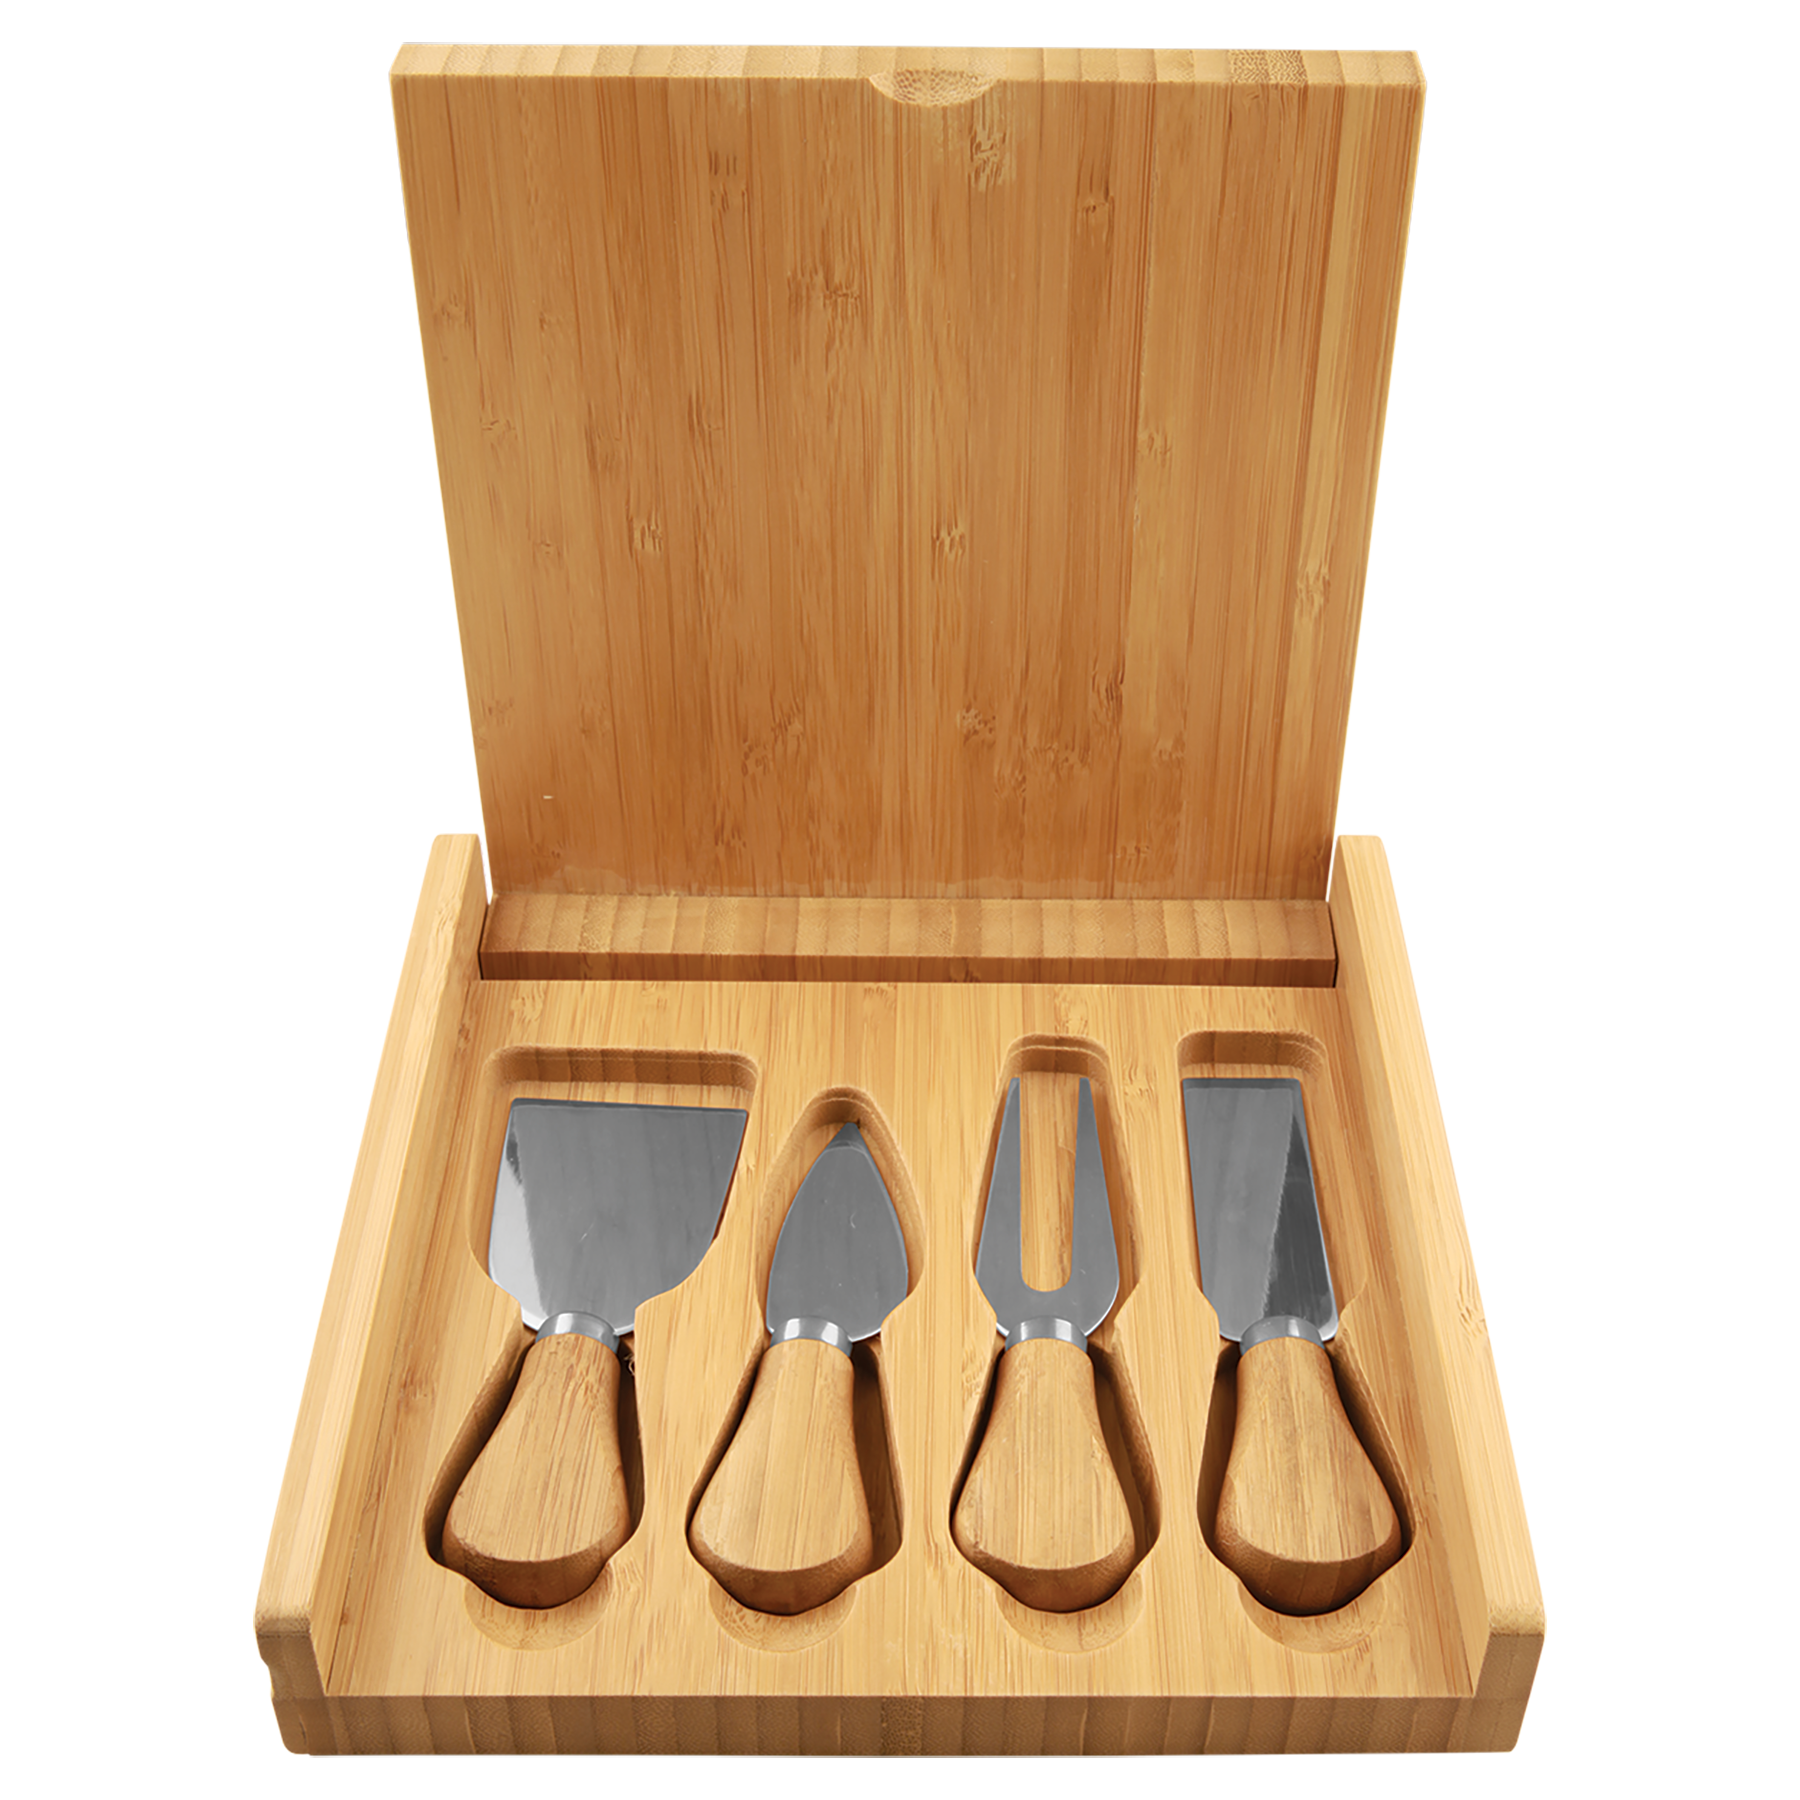 8" x 8" Bamboo Cheese Set with 4 Tools